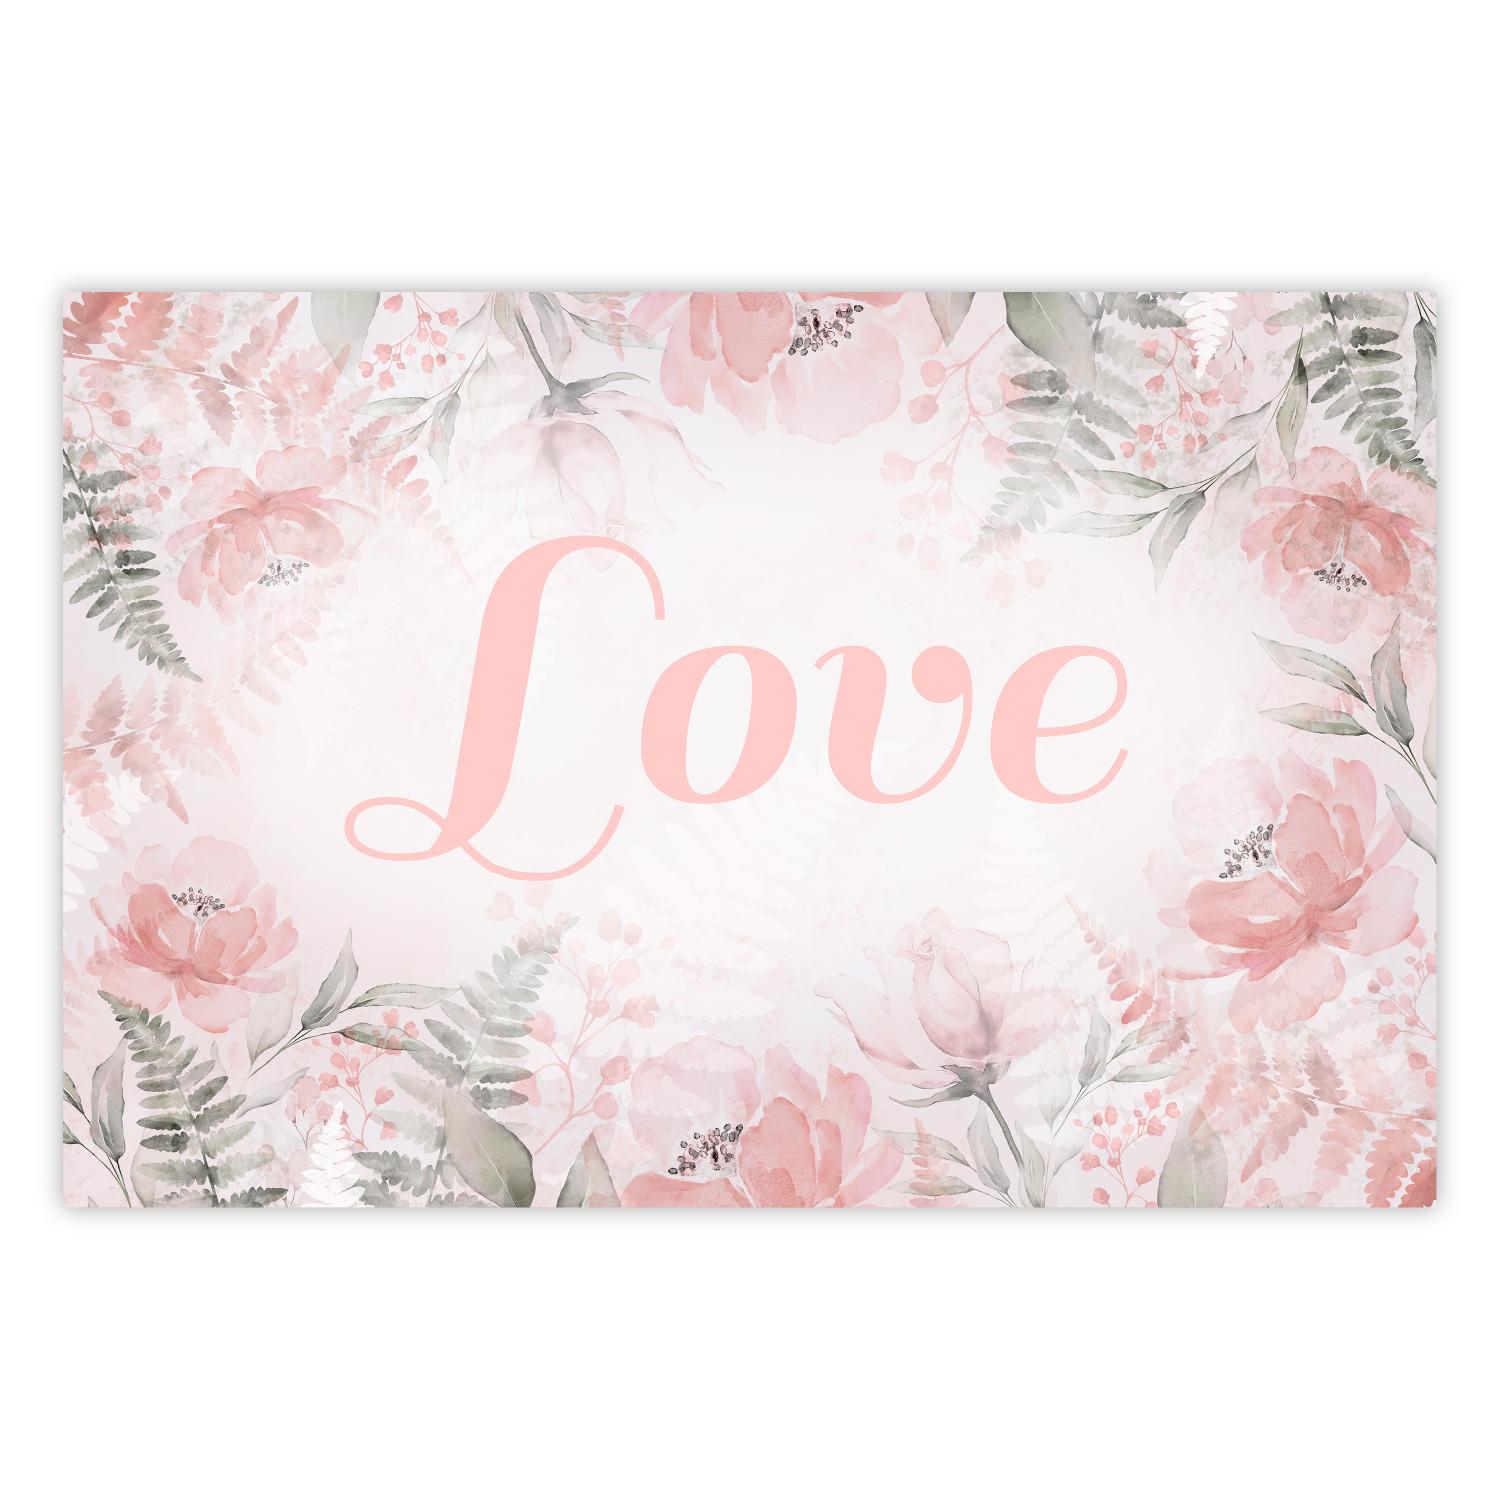 Poster Love - Romantic Inscription on a Rose Background Among Plants and Leaves